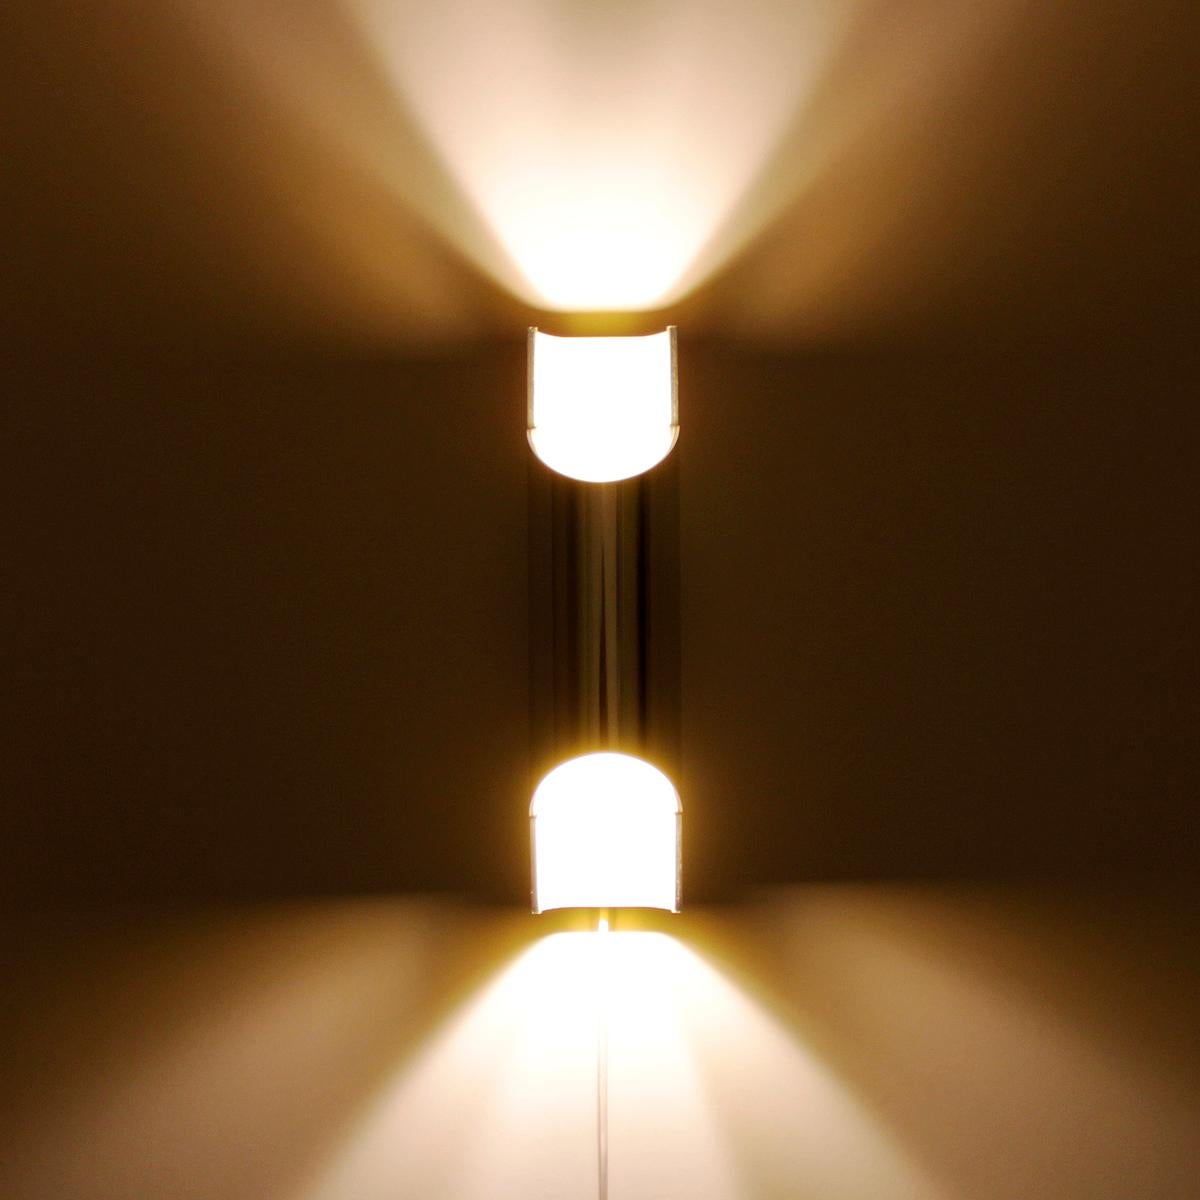 Pandean, aluminum sconce, designed by Bent Karlby and produced by Lyfa - an absolutely gorgeous design from 1970 - very attractive Danish Modern wall light in very good vintage condition!

This wall lamp is made up by a polished aluminum 